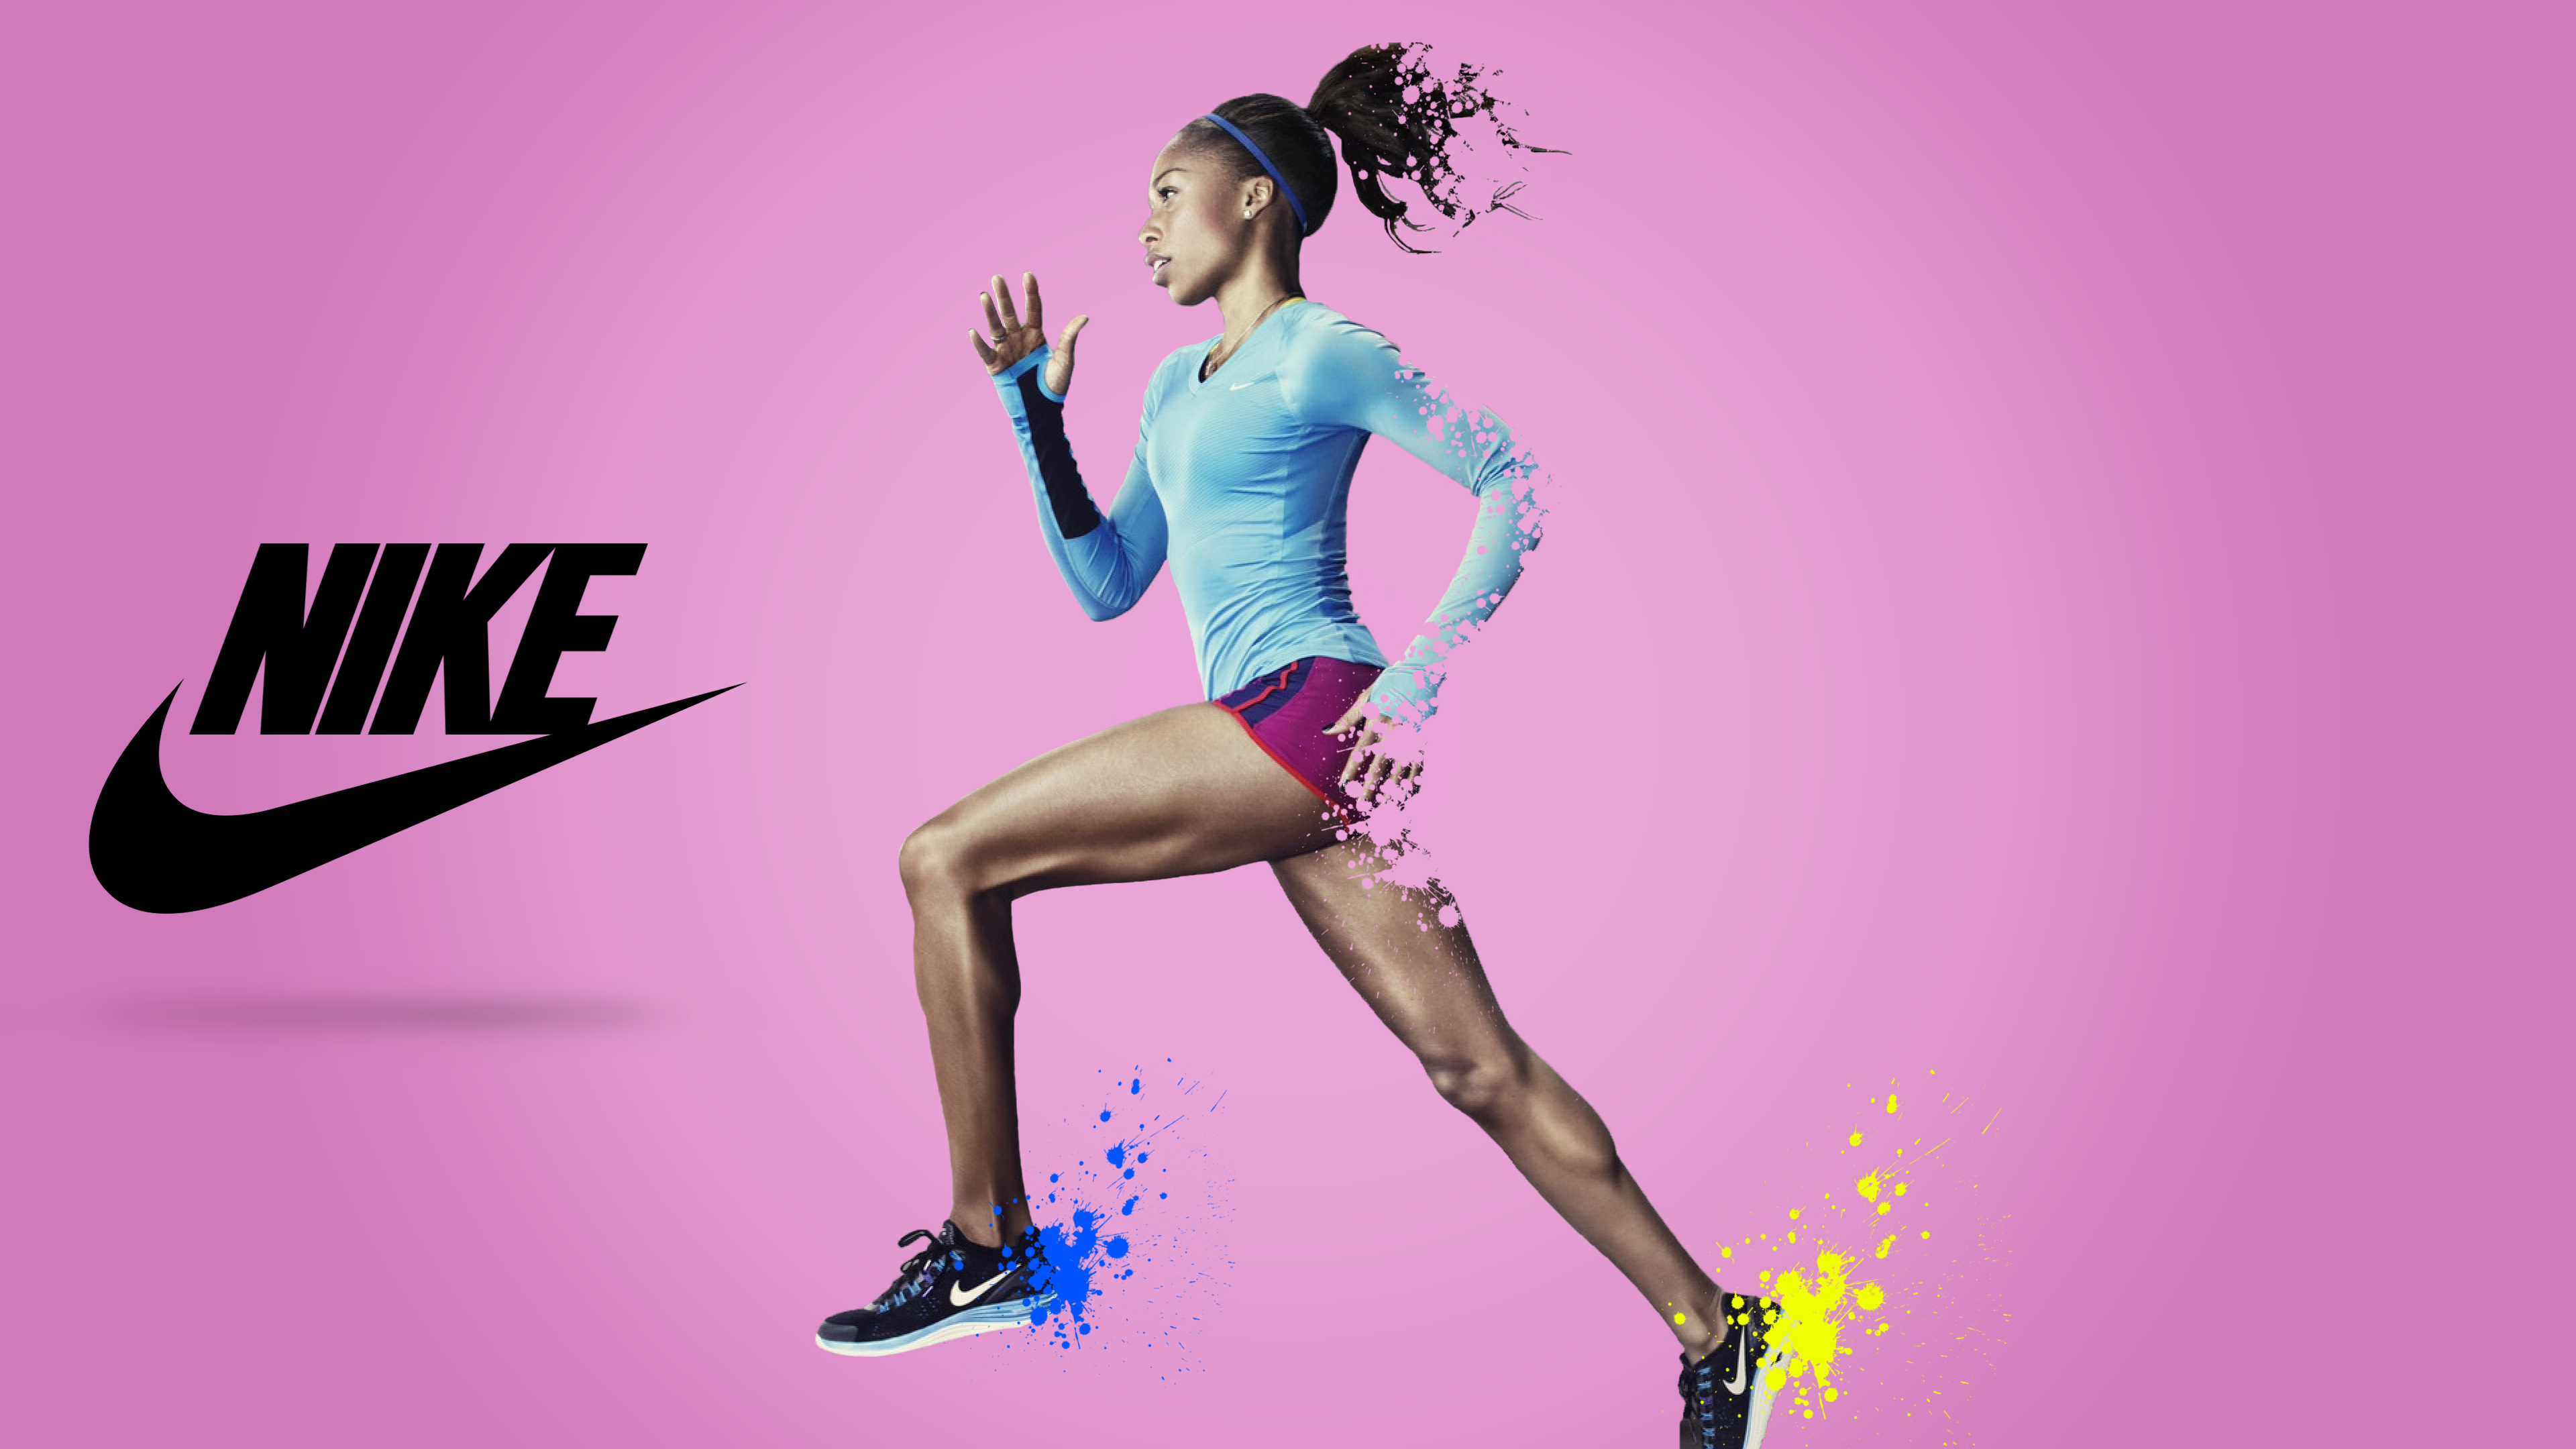 HD Running Girl Backgrounds Images,Cool Pictures Free Download 